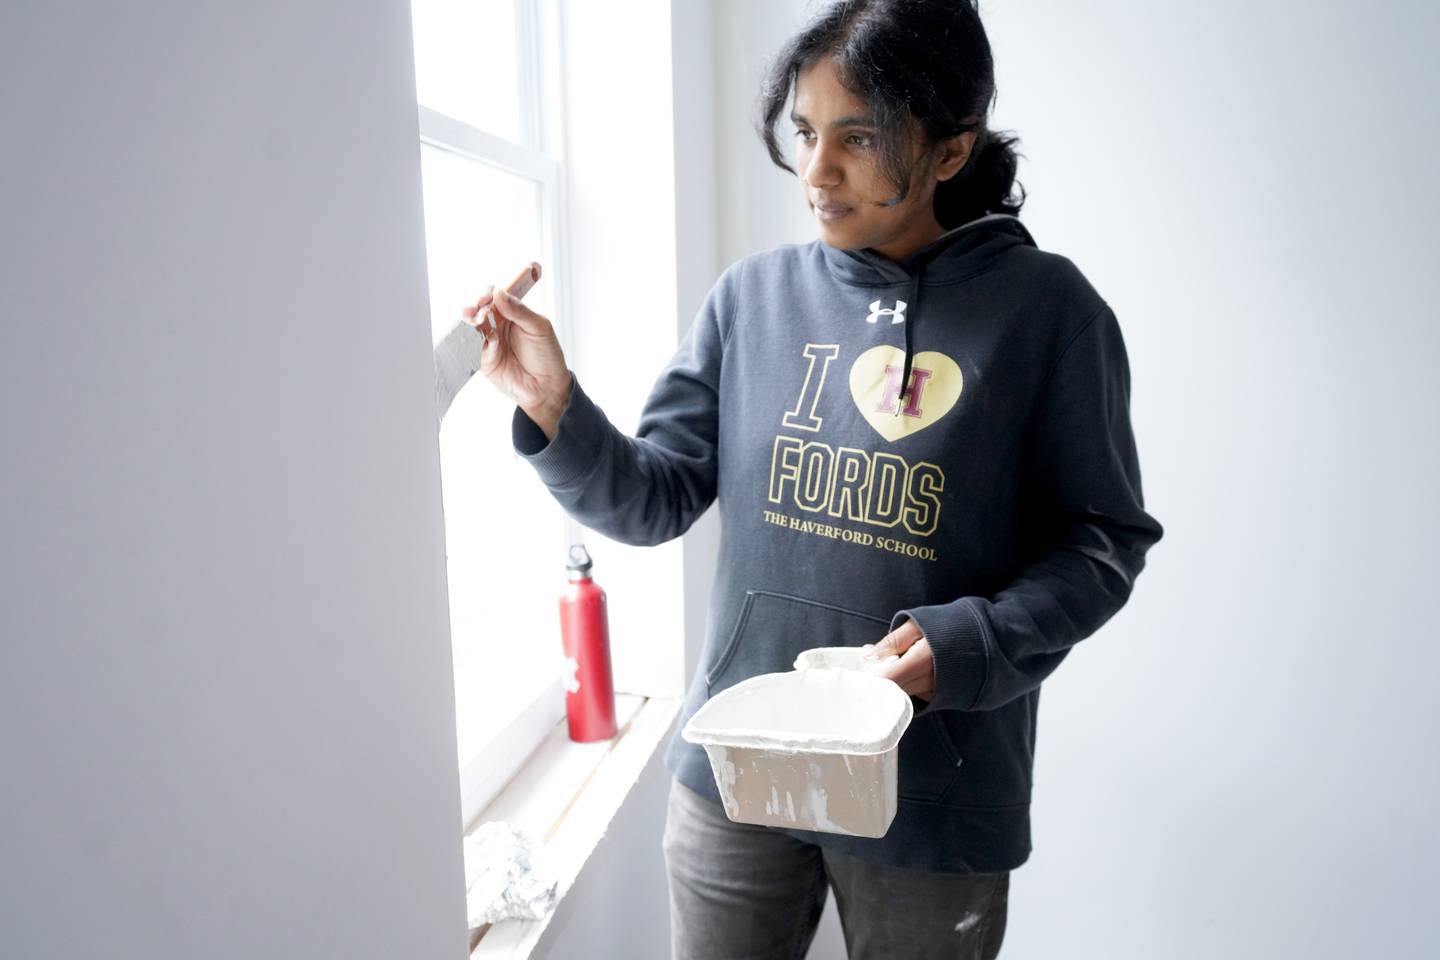 Breath of God Lutheran Church in Highlandtown renovated a vacant house that is to become a home for a new refugee family. Volunteers painted the house Friday and Saturday in hopes of having the home ready for occupancy bay February 2023.  Volunteer Anisha Jayodevan paints around the window sill.